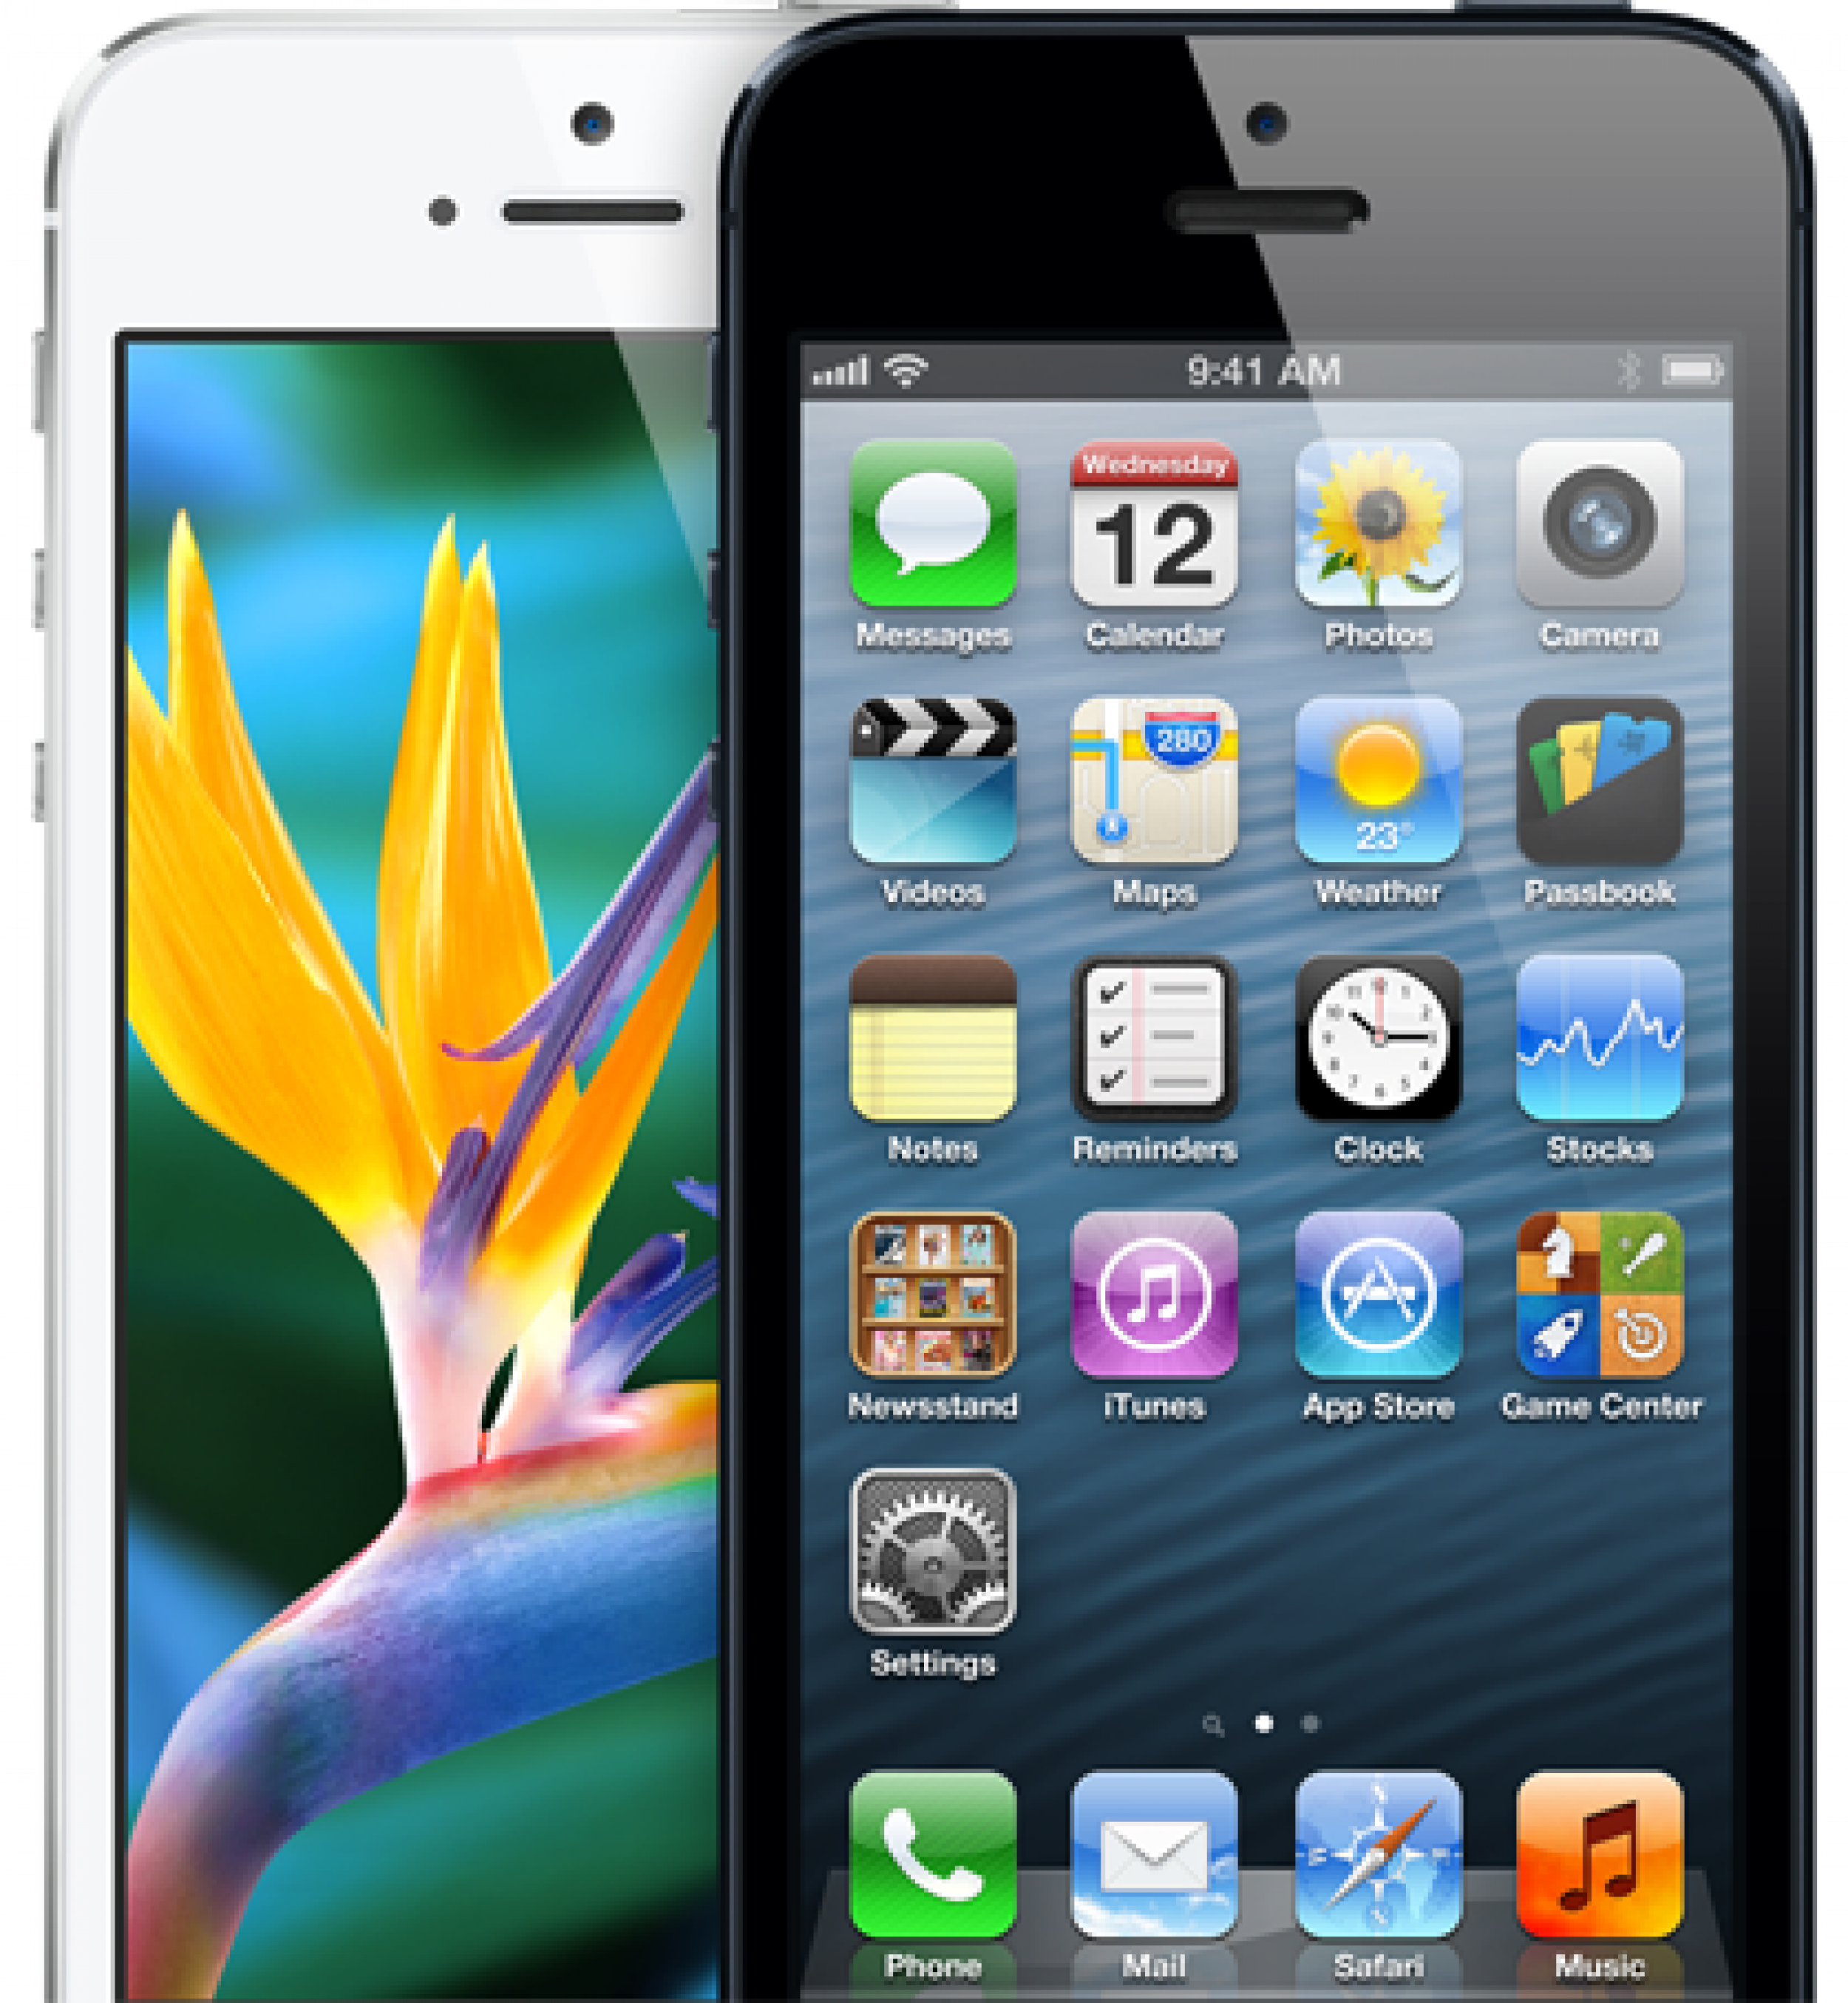 Apple Iphone 6 Rumors Bigger Iphones With 4 7 Inch And 5 7 Inch Screens May Be Launched In 2014